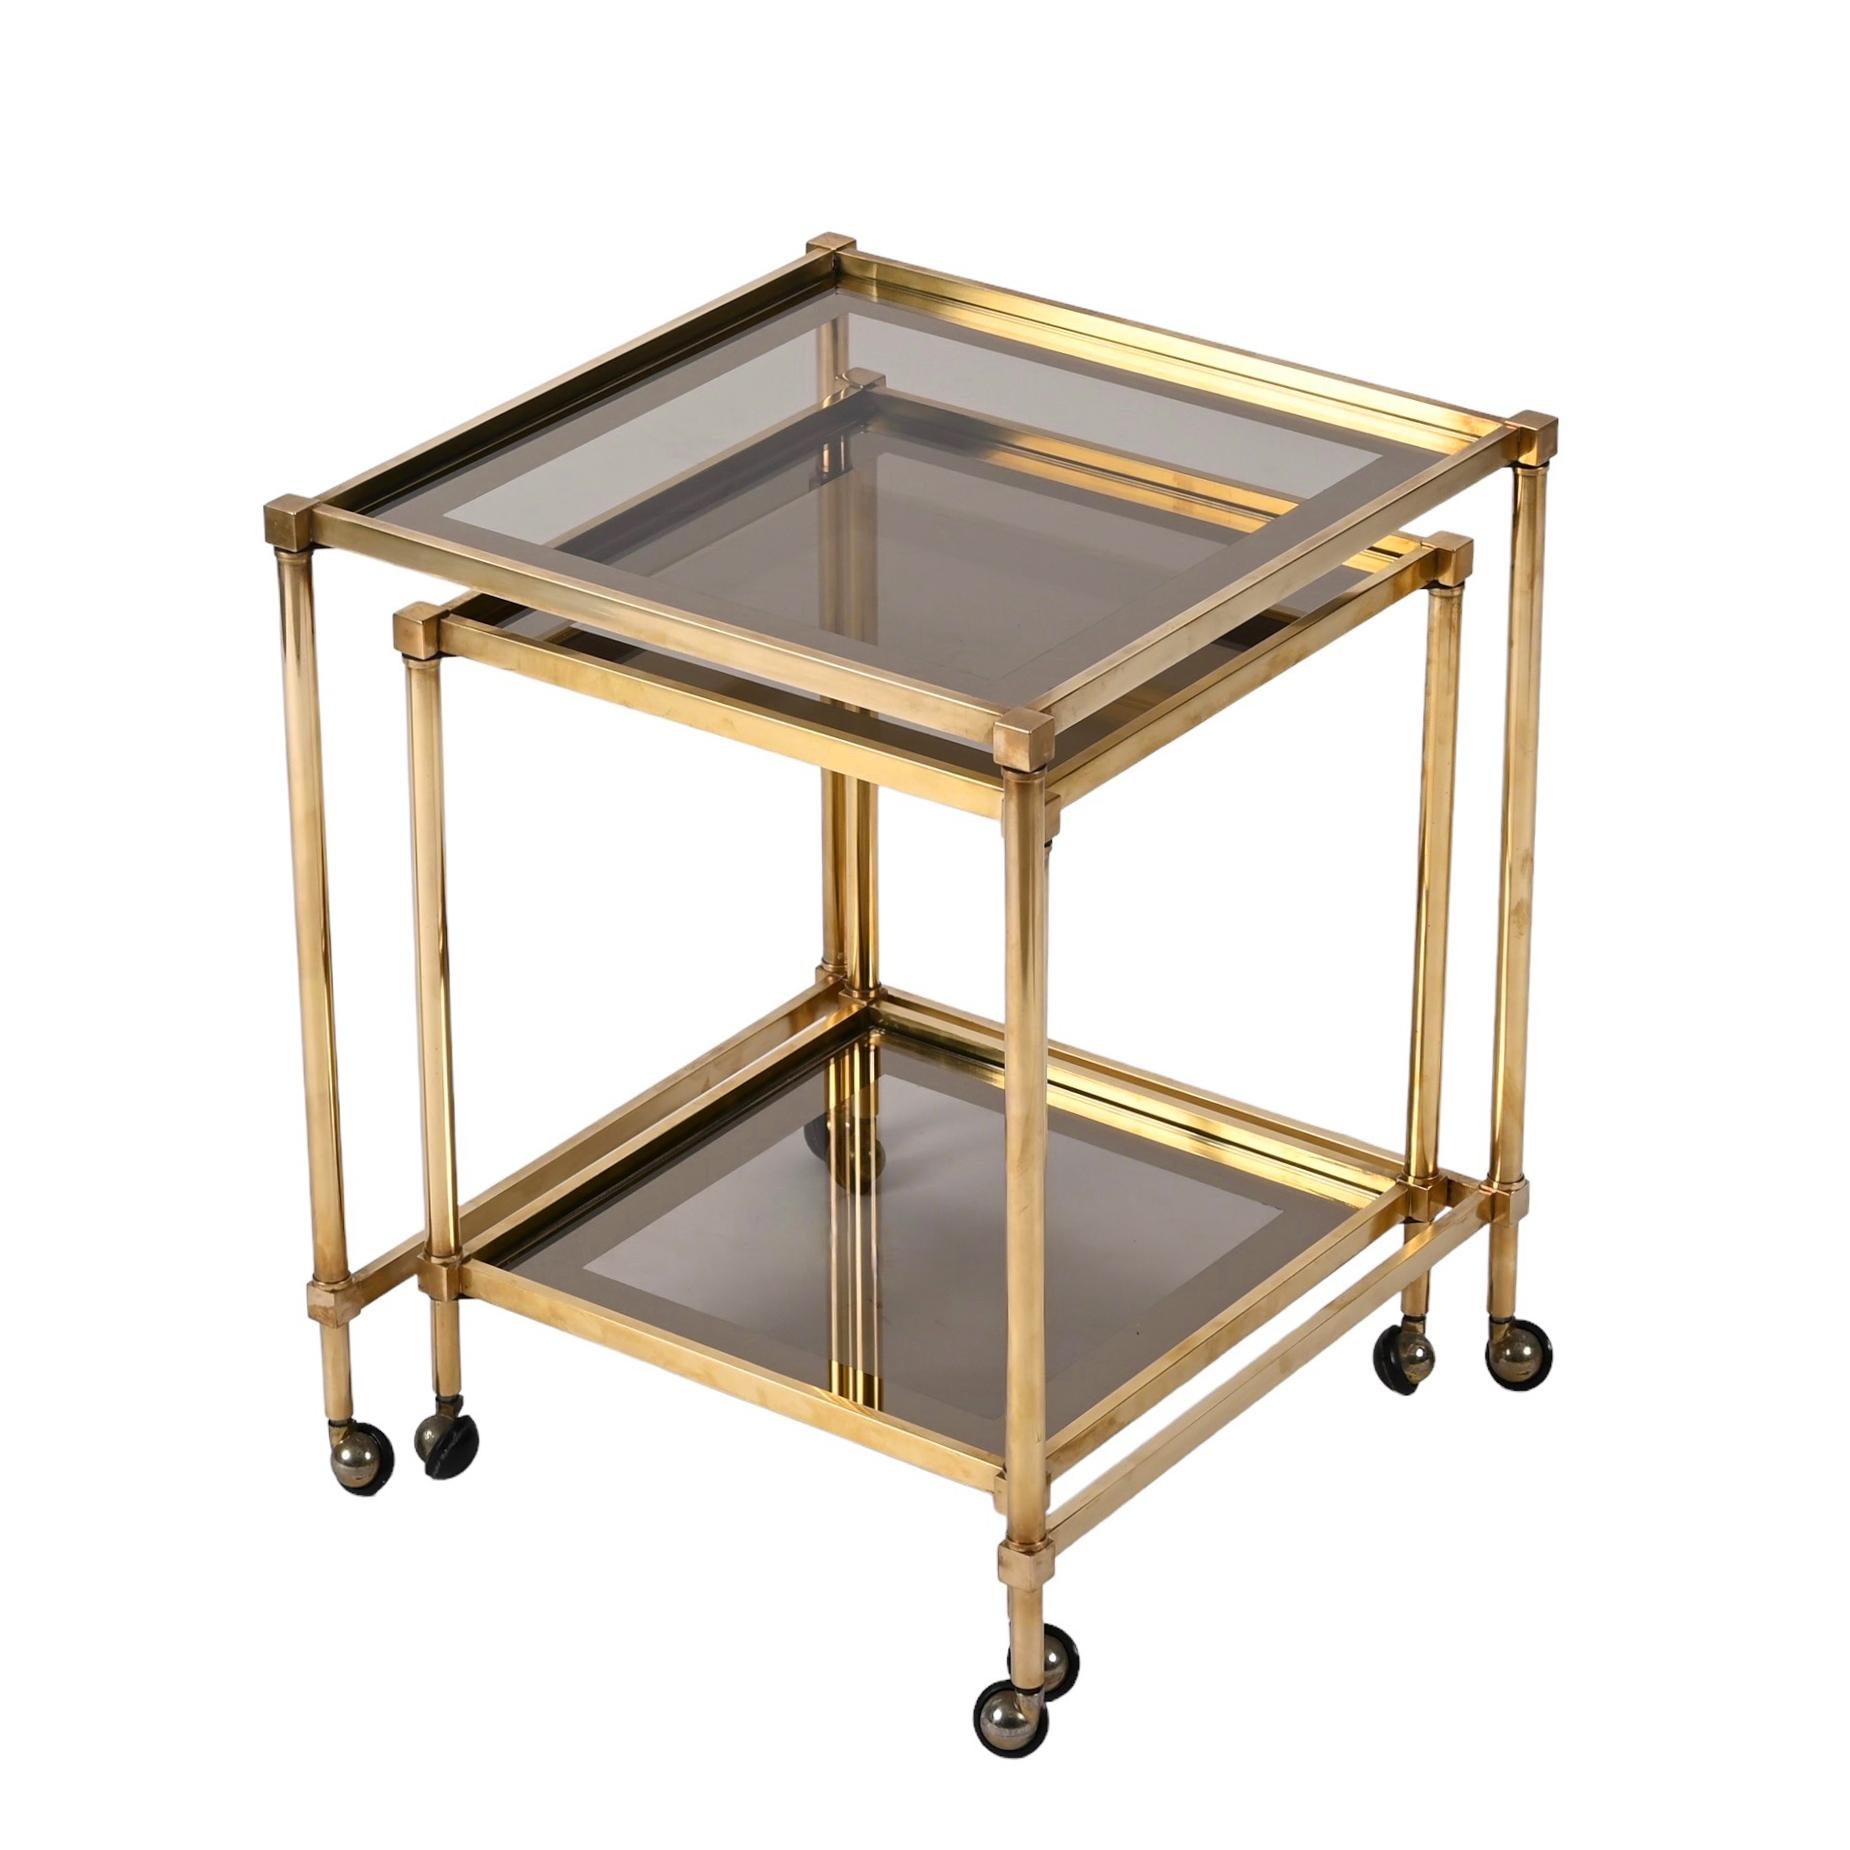 Pair of Maison Jansen Brass Mirrored Border Nesting Tables with Glass Top, 1970s For Sale 6